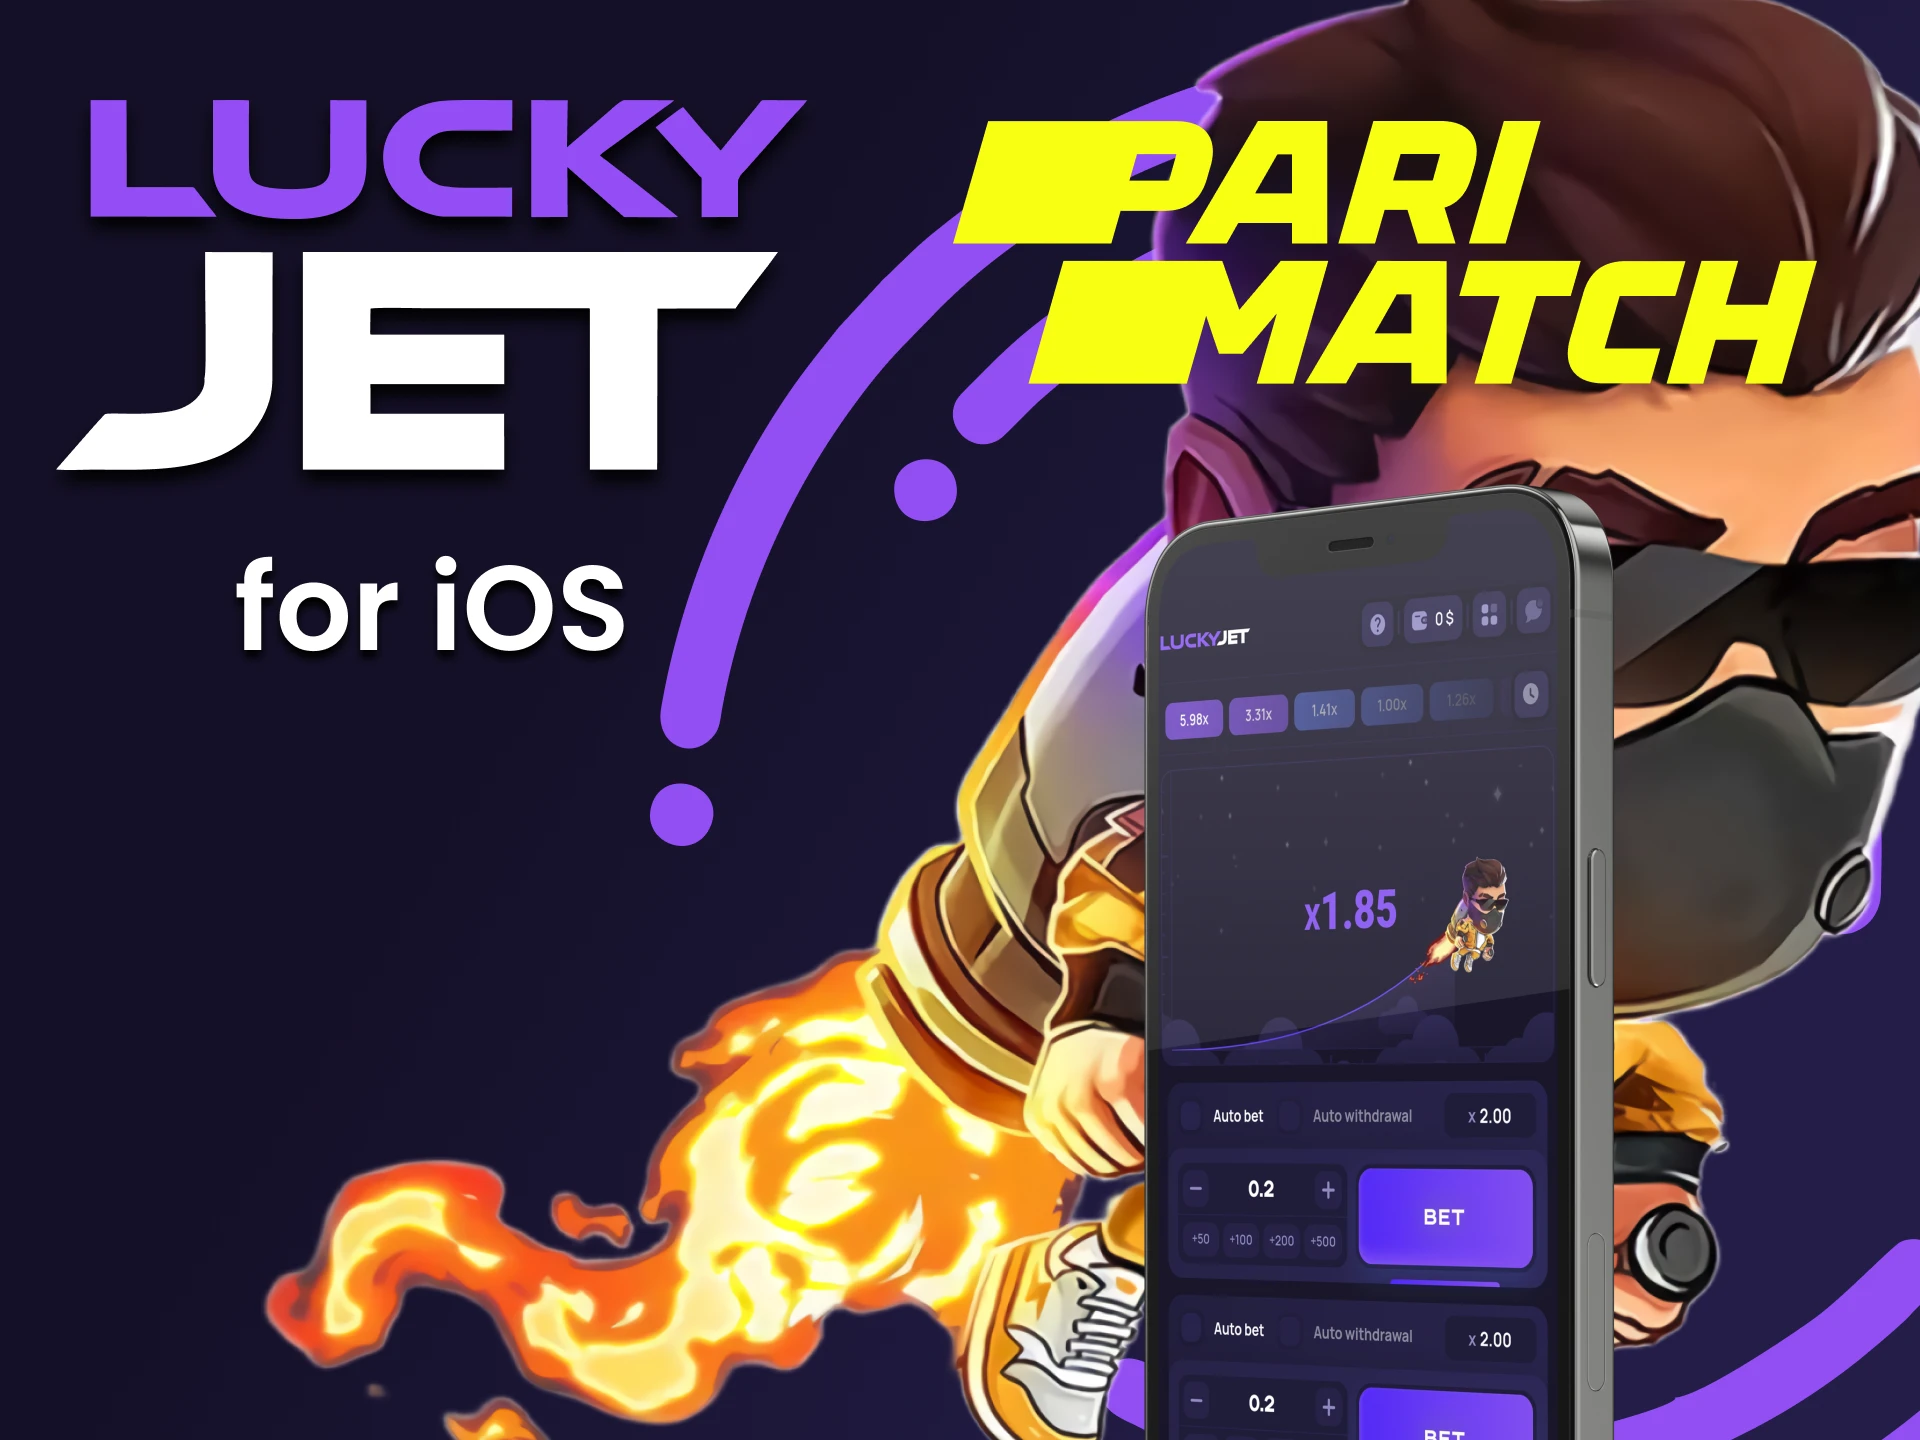 Play Lucky Jet with the Parimatch iOS app.